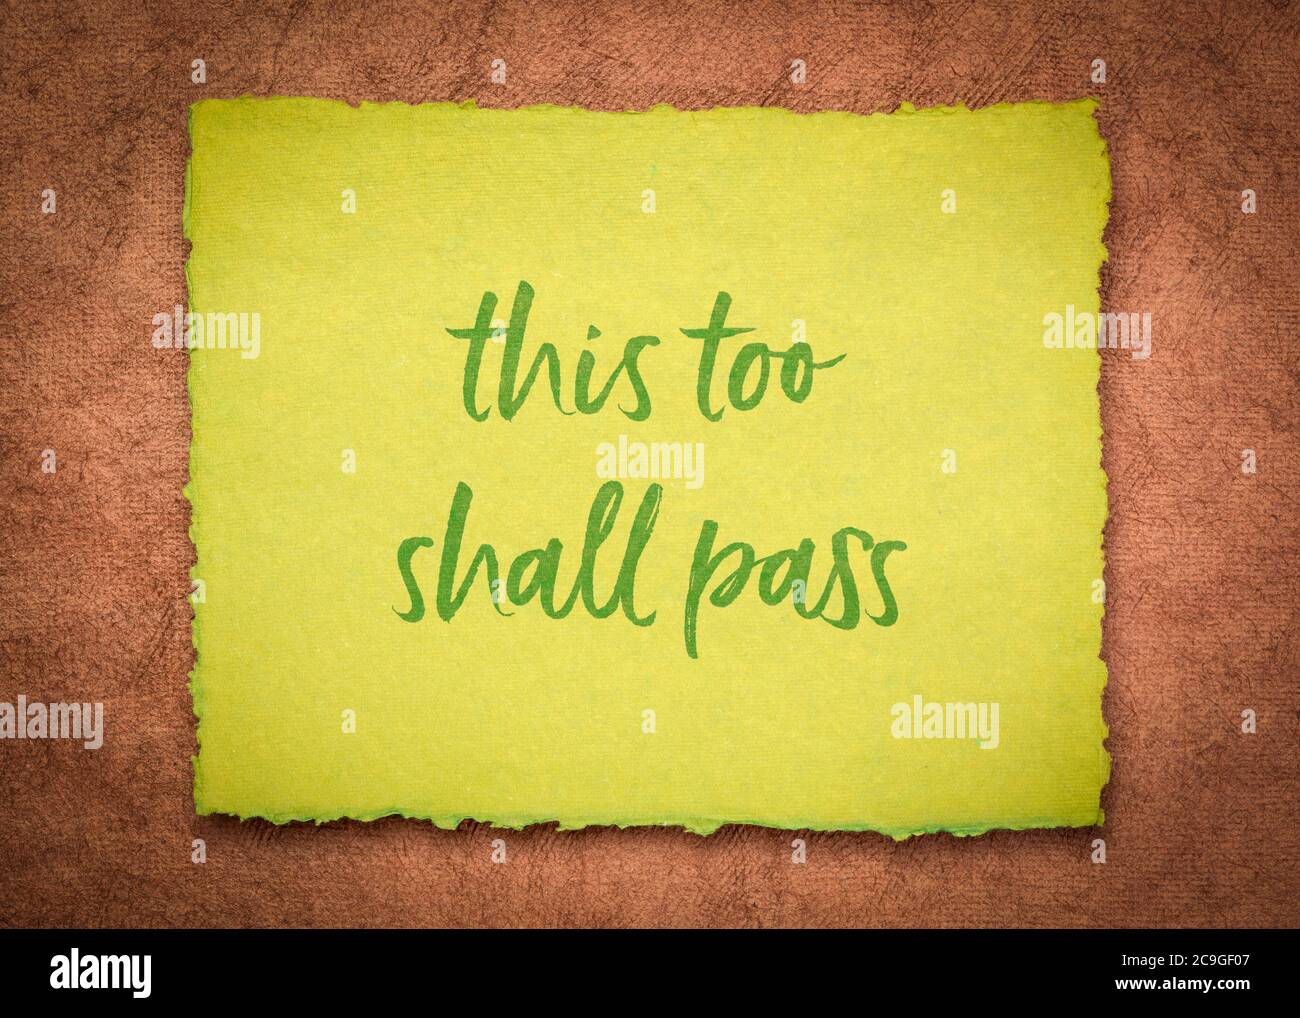 this too shall pass - inspirational handwriting on a handmade paper, positivity, hope, temporary nature, or ephemerality of the human condition and si Stock Photo